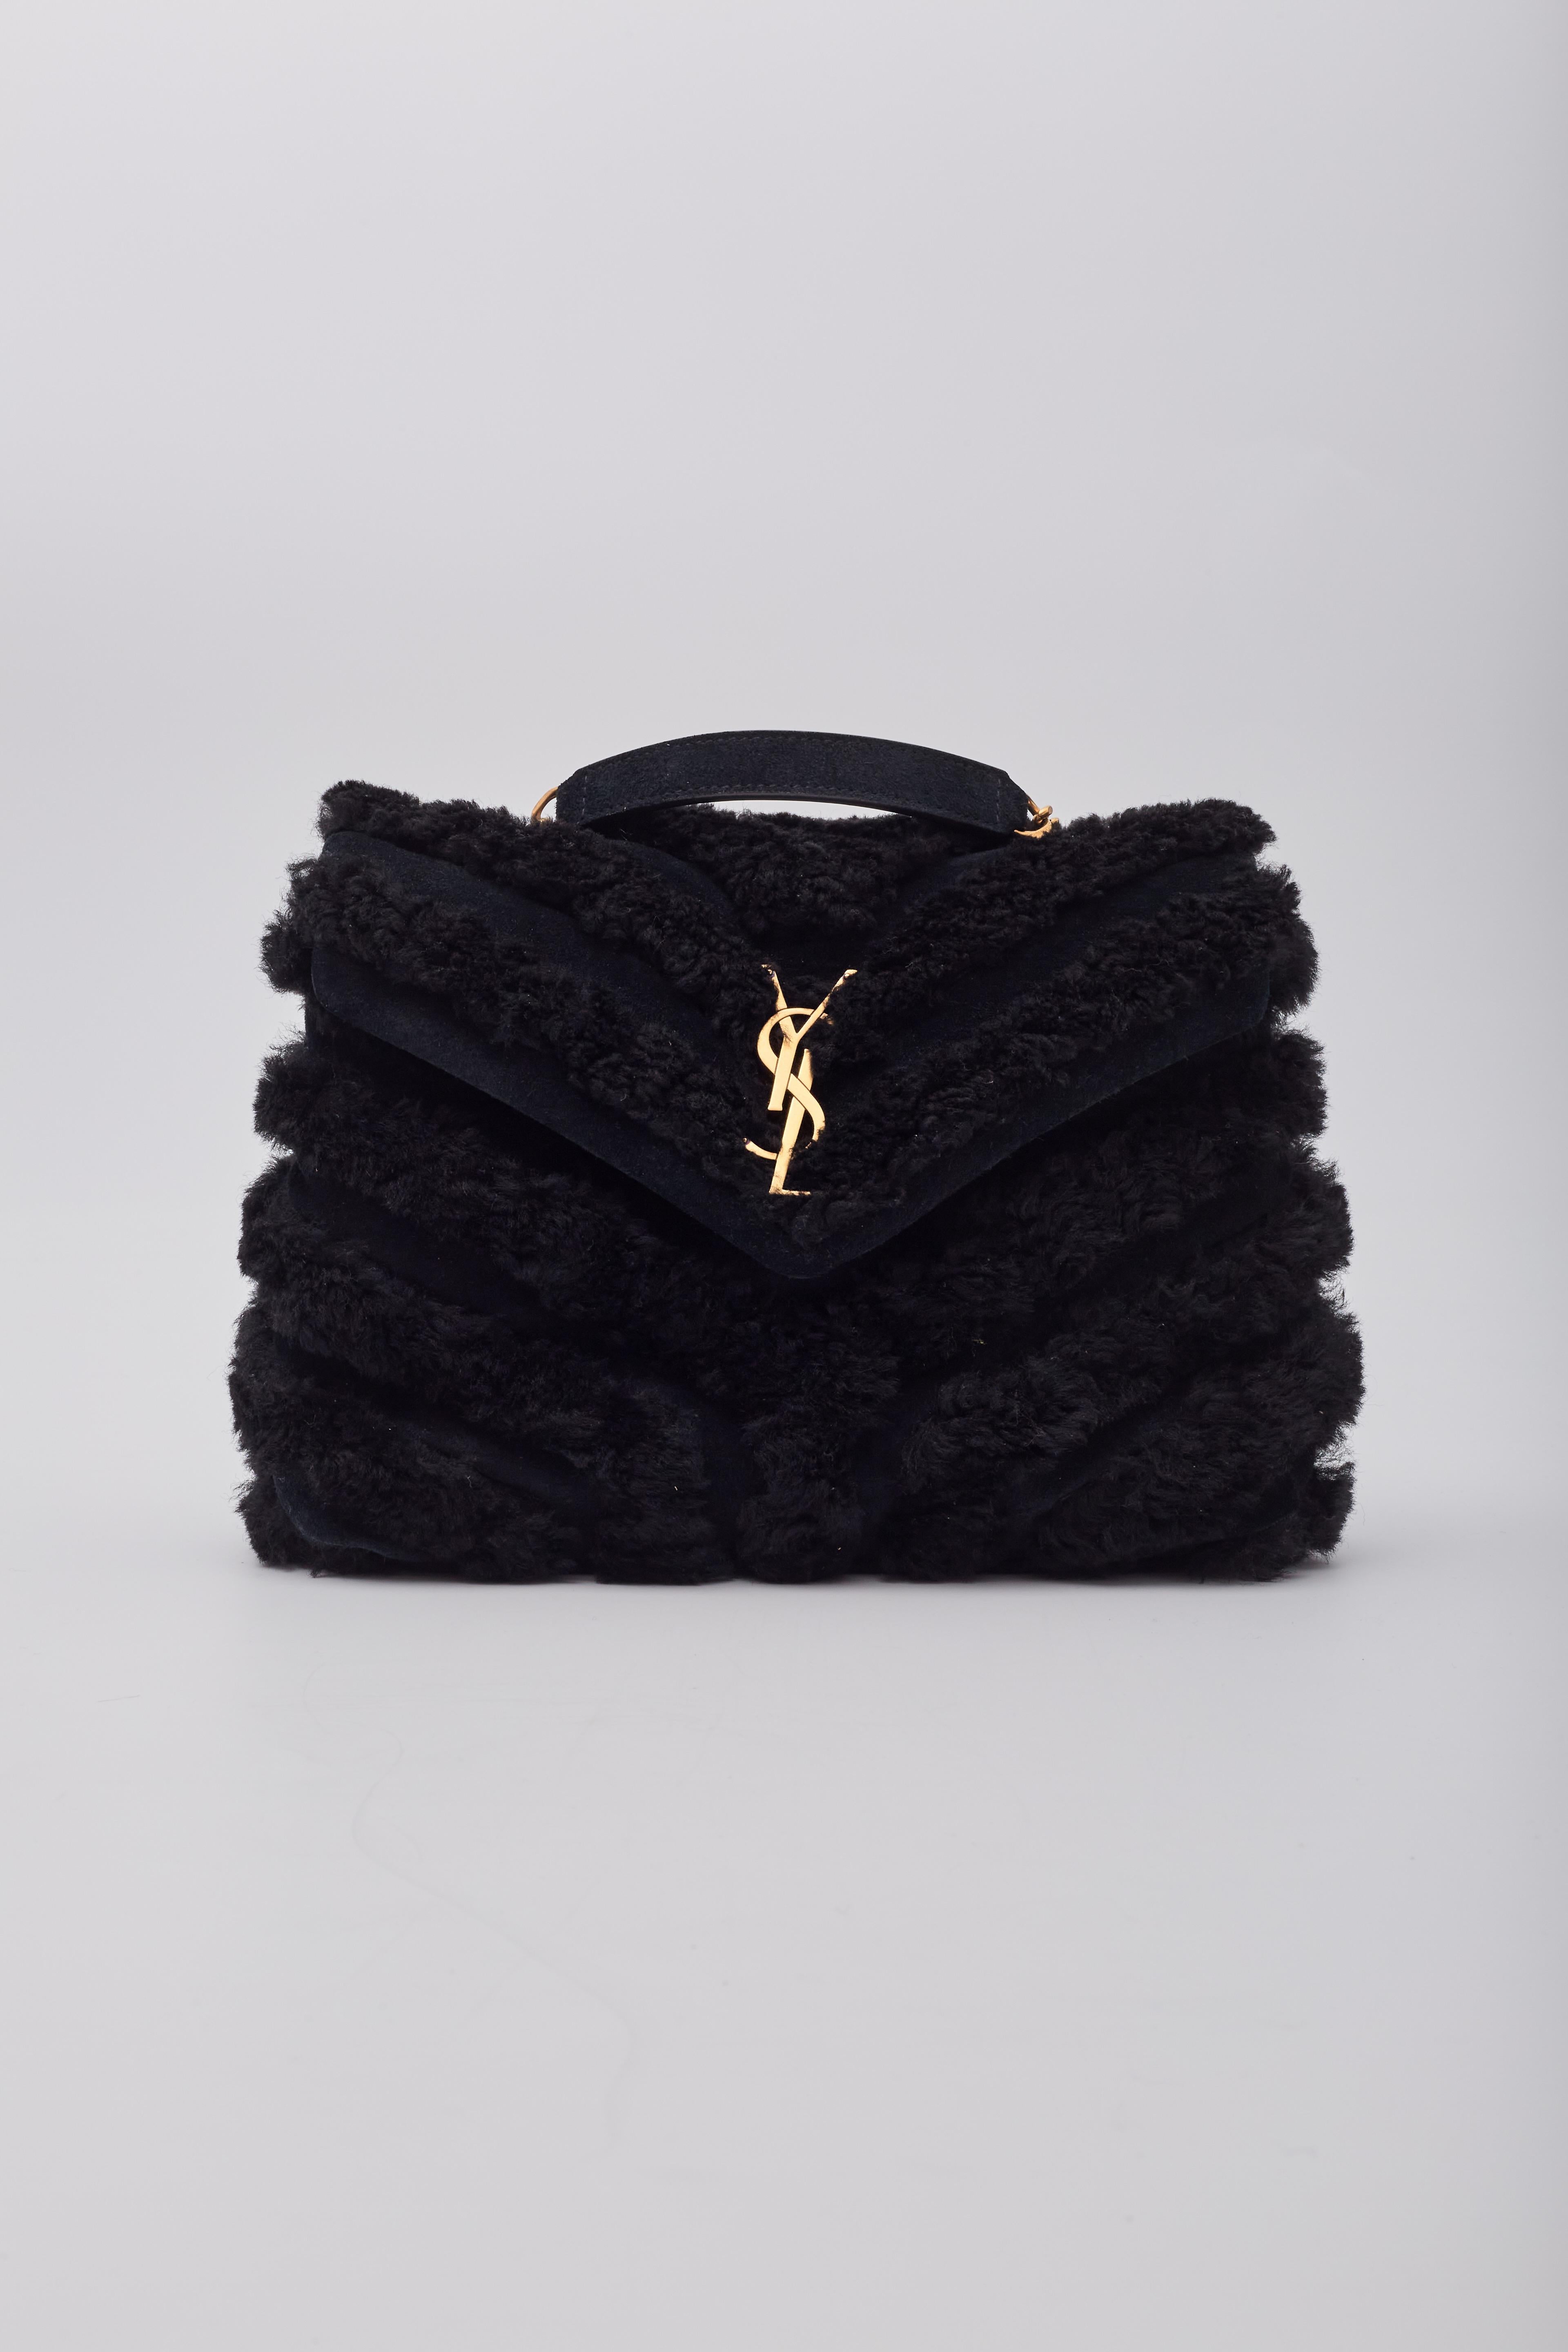 Saint Laurent Black Shearling Loulou Shoulder Bag Small In New Condition For Sale In Montreal, Quebec